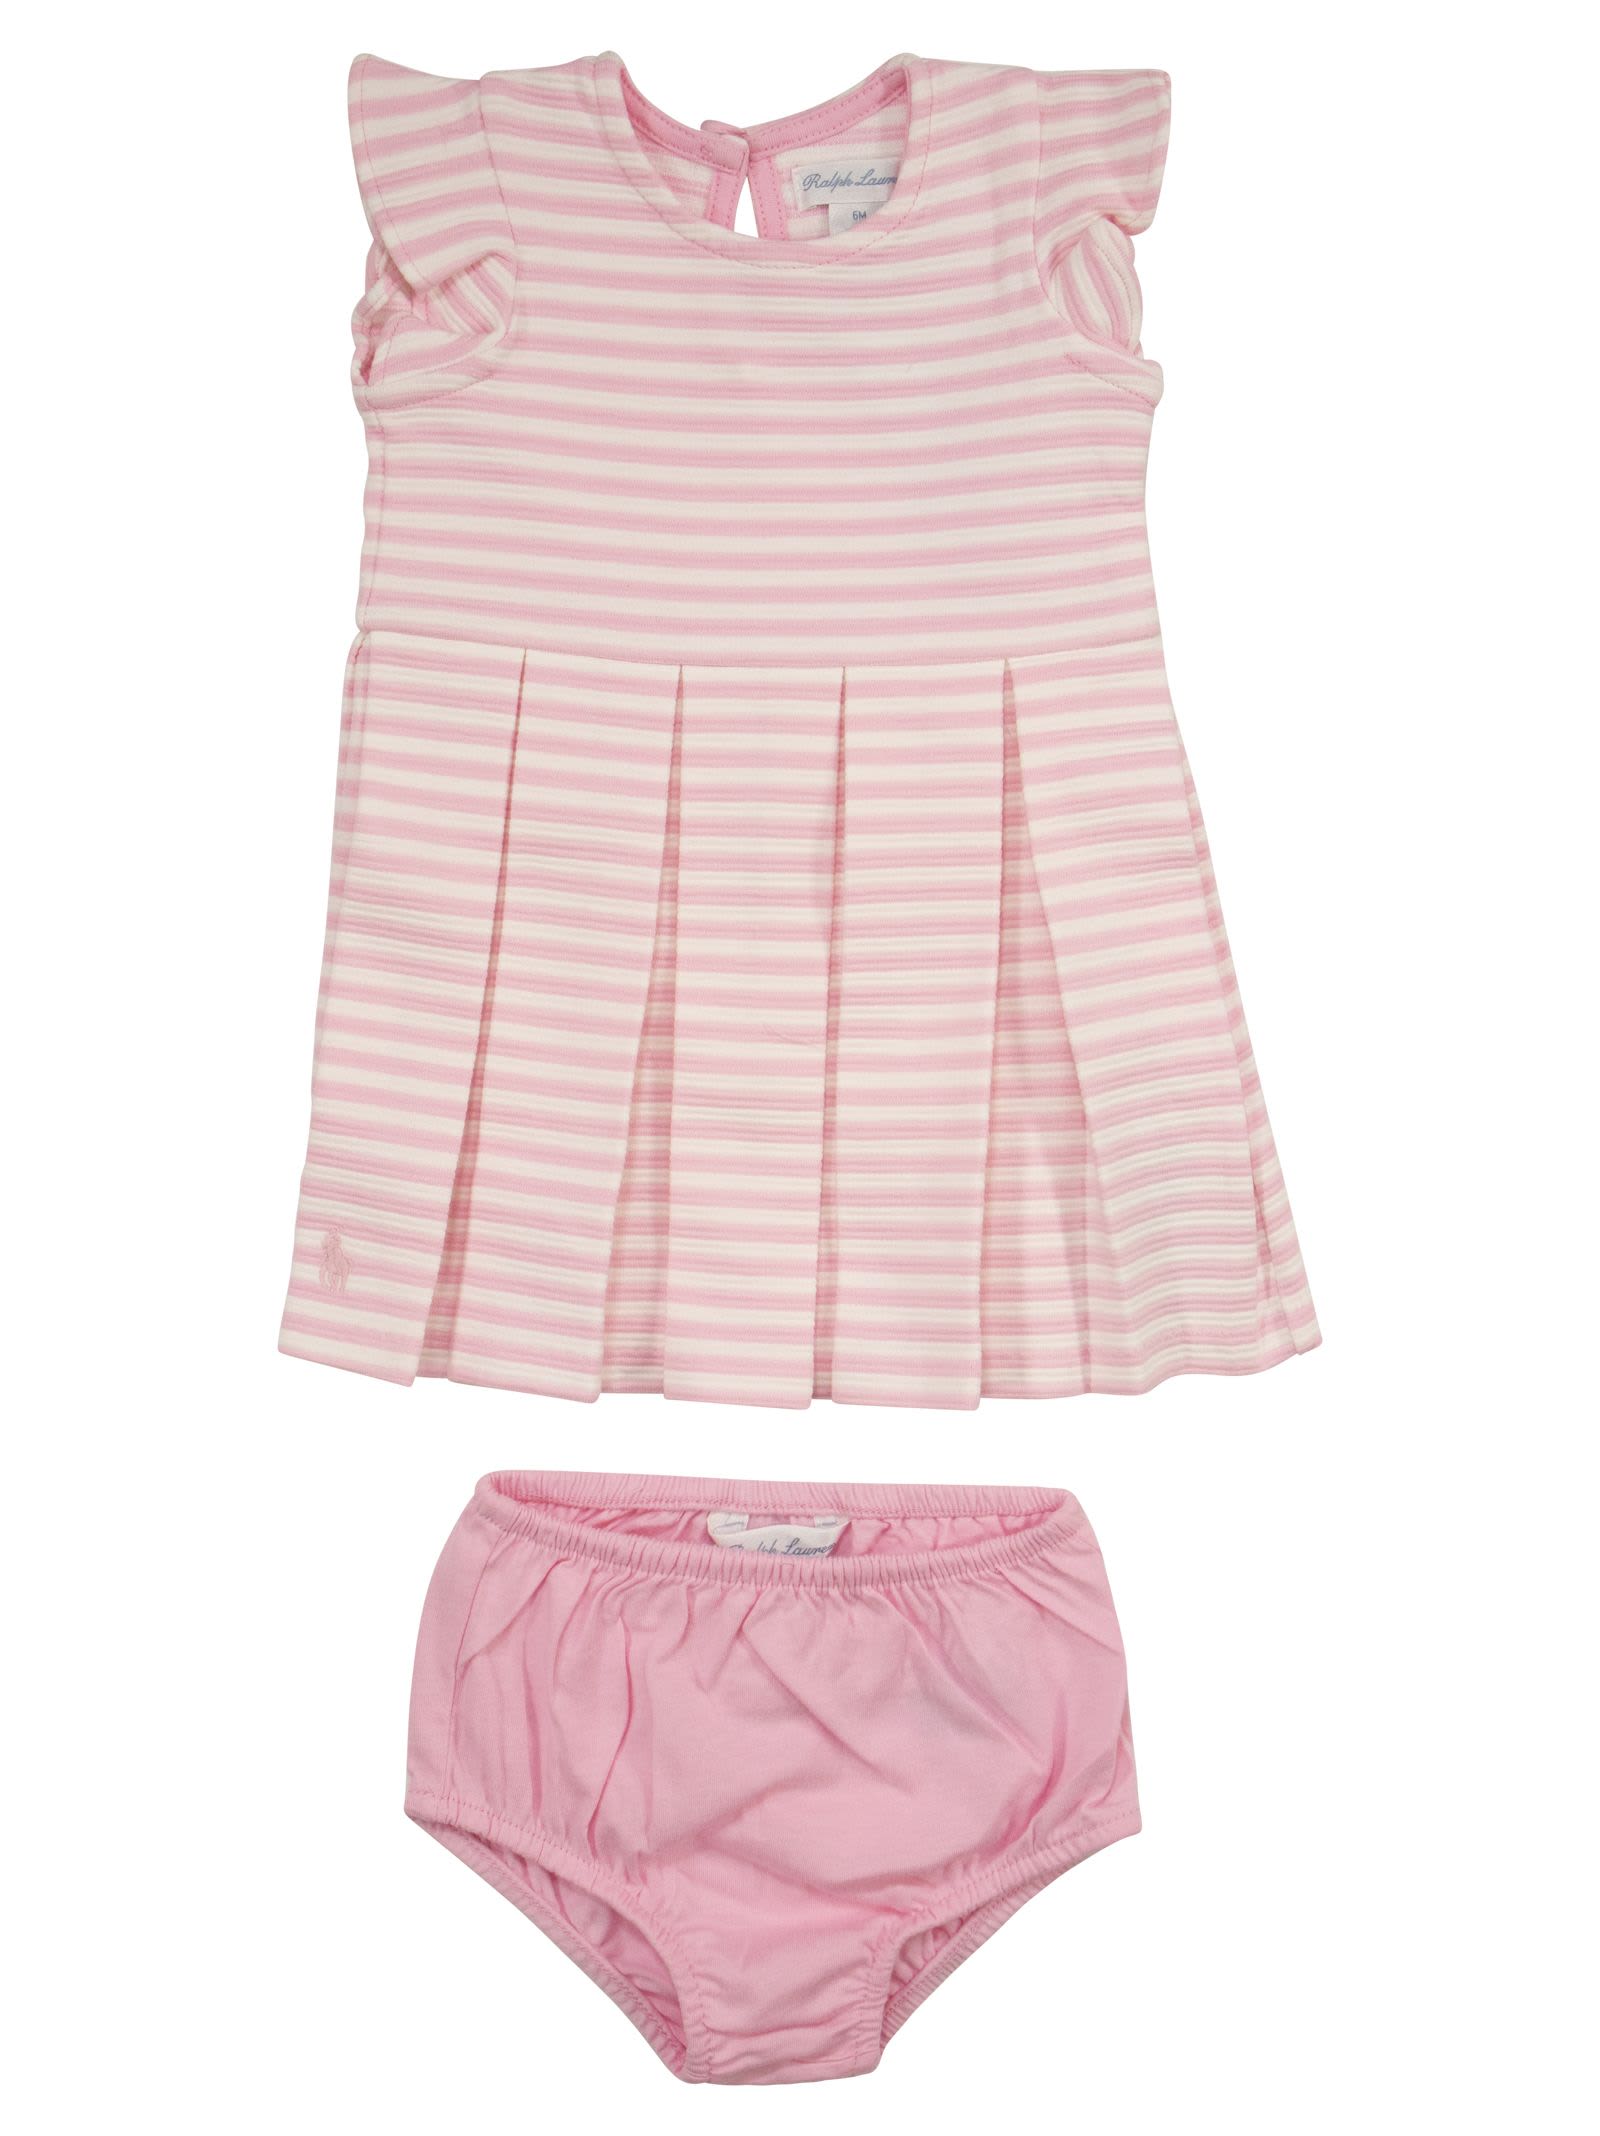 Polo Ralph Lauren Babies' Striped Cotton Dress In Pink/white